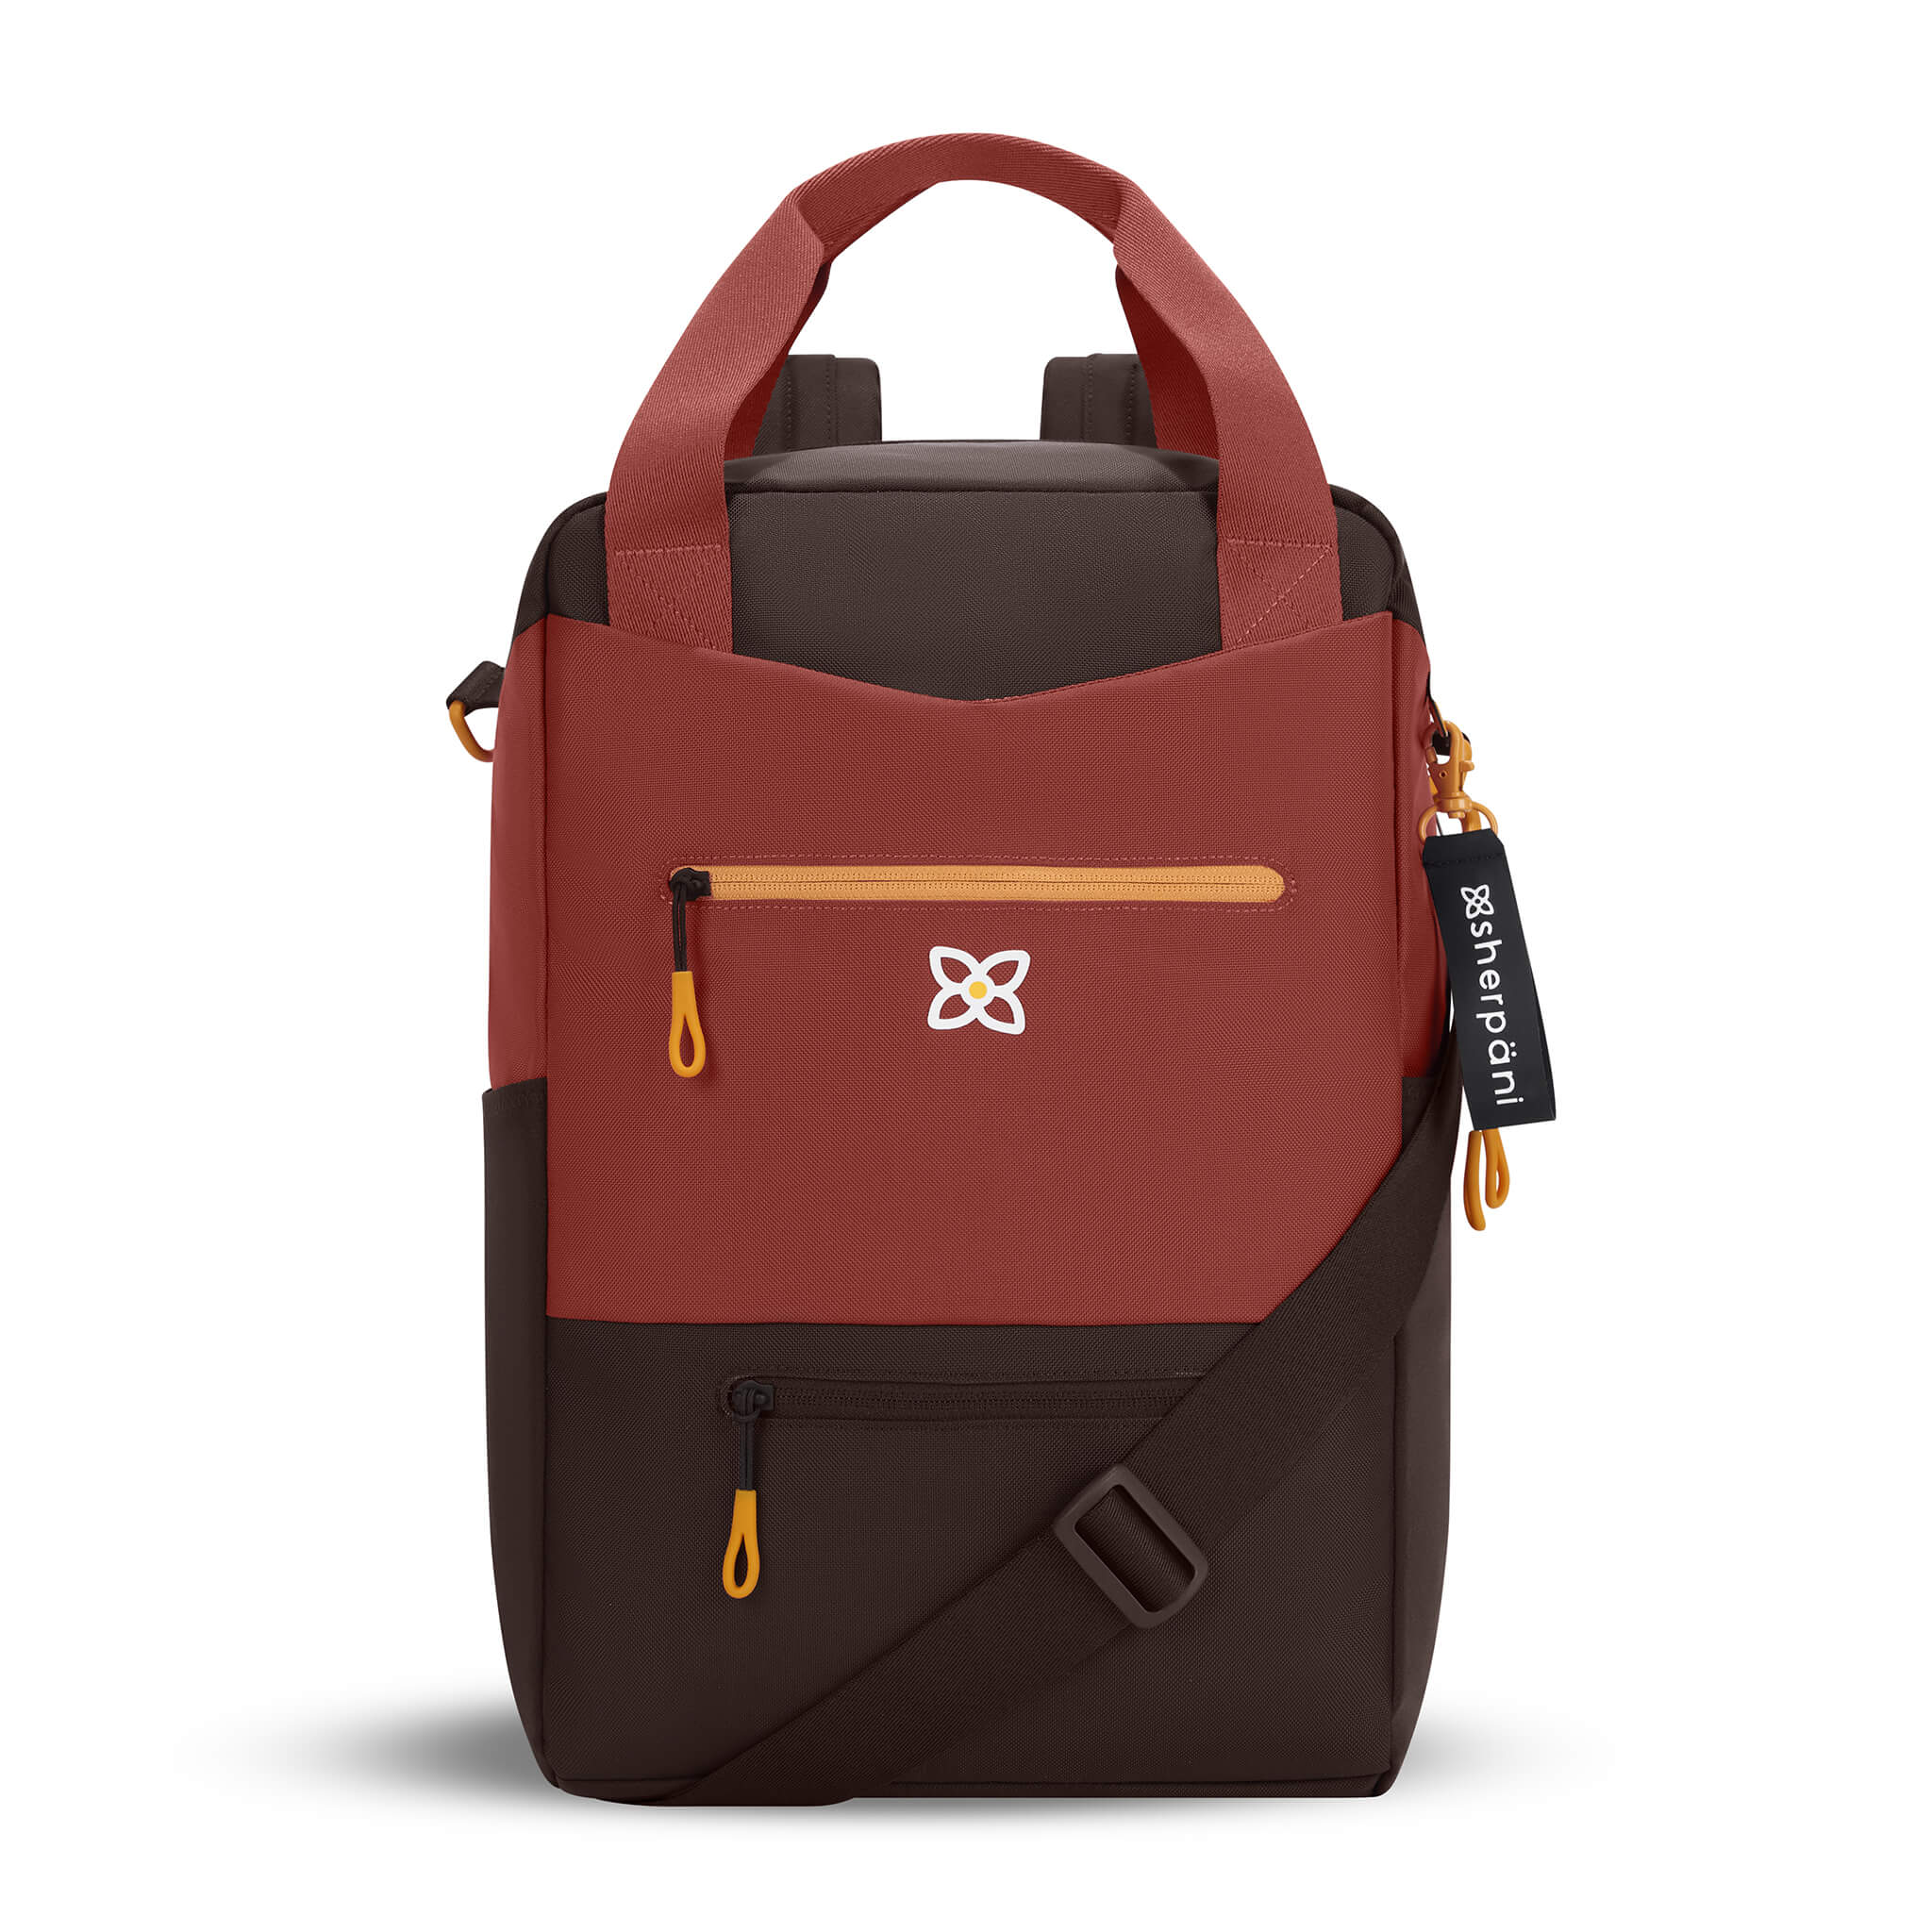 Flat front view of Sherpani convertible travel bag, the Camden in Cider. Camden features include adjustable backpack straps, adjustable crossbody strap, tote bag handles, upper zipper pocket, lower zipper pocket, padded laptop sleeve, three water bottle holders and luggage pass through feature. The Cider color is two tones in burgundy and brown with accents in yellow. 